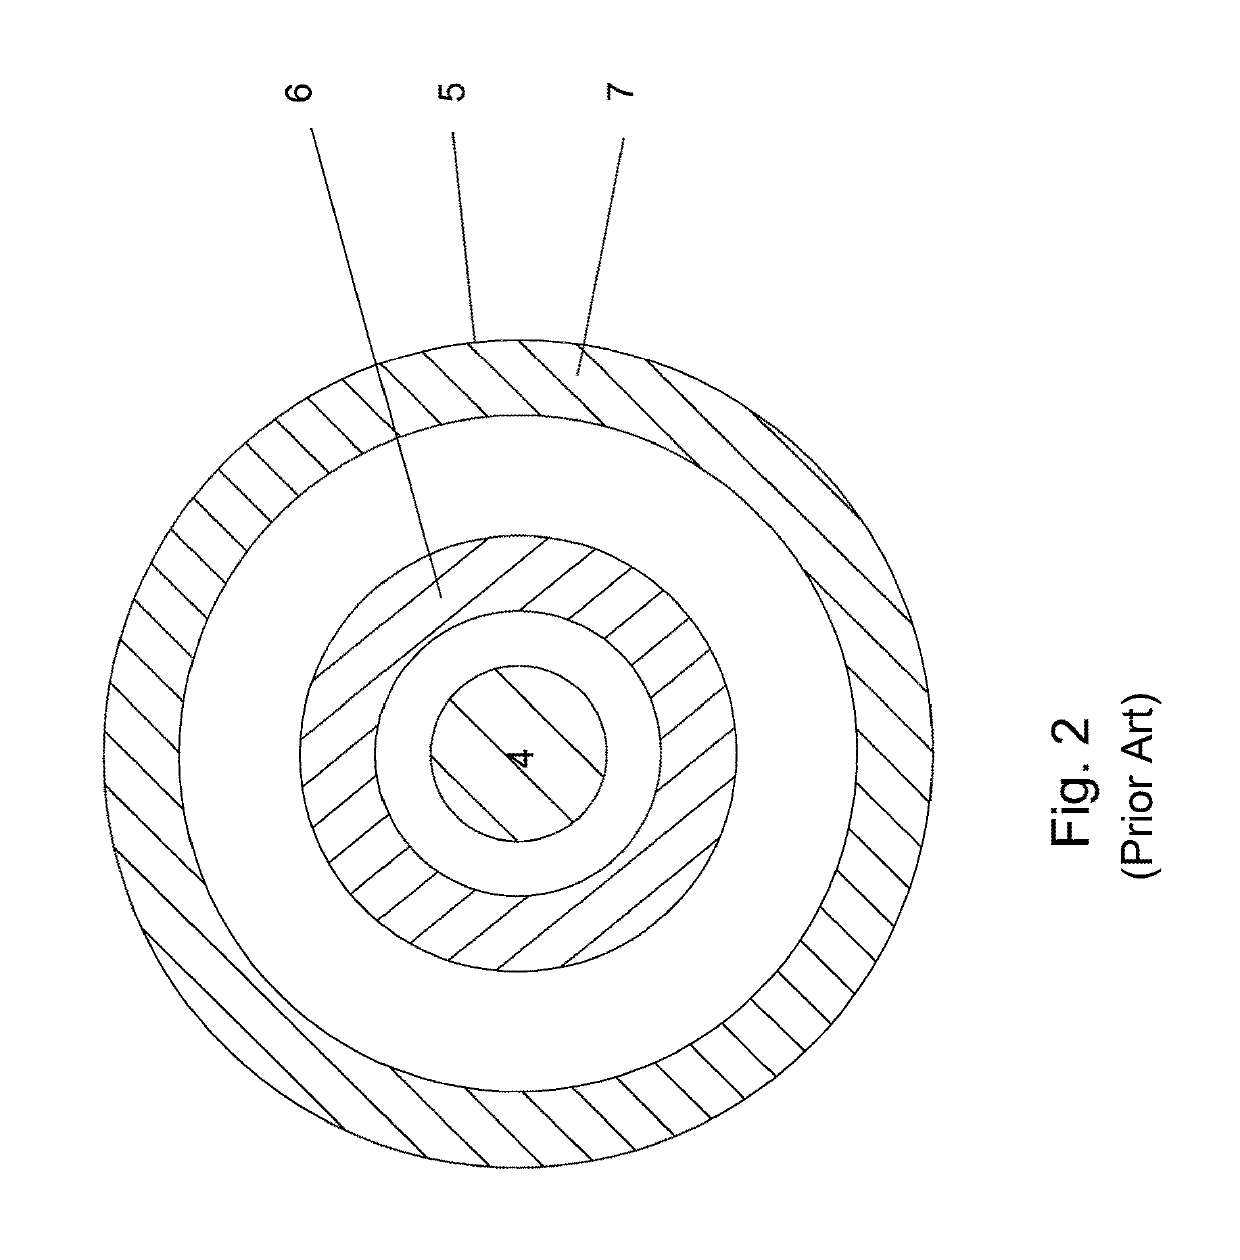 Load cell comprising an elastic body having a base and flexible member